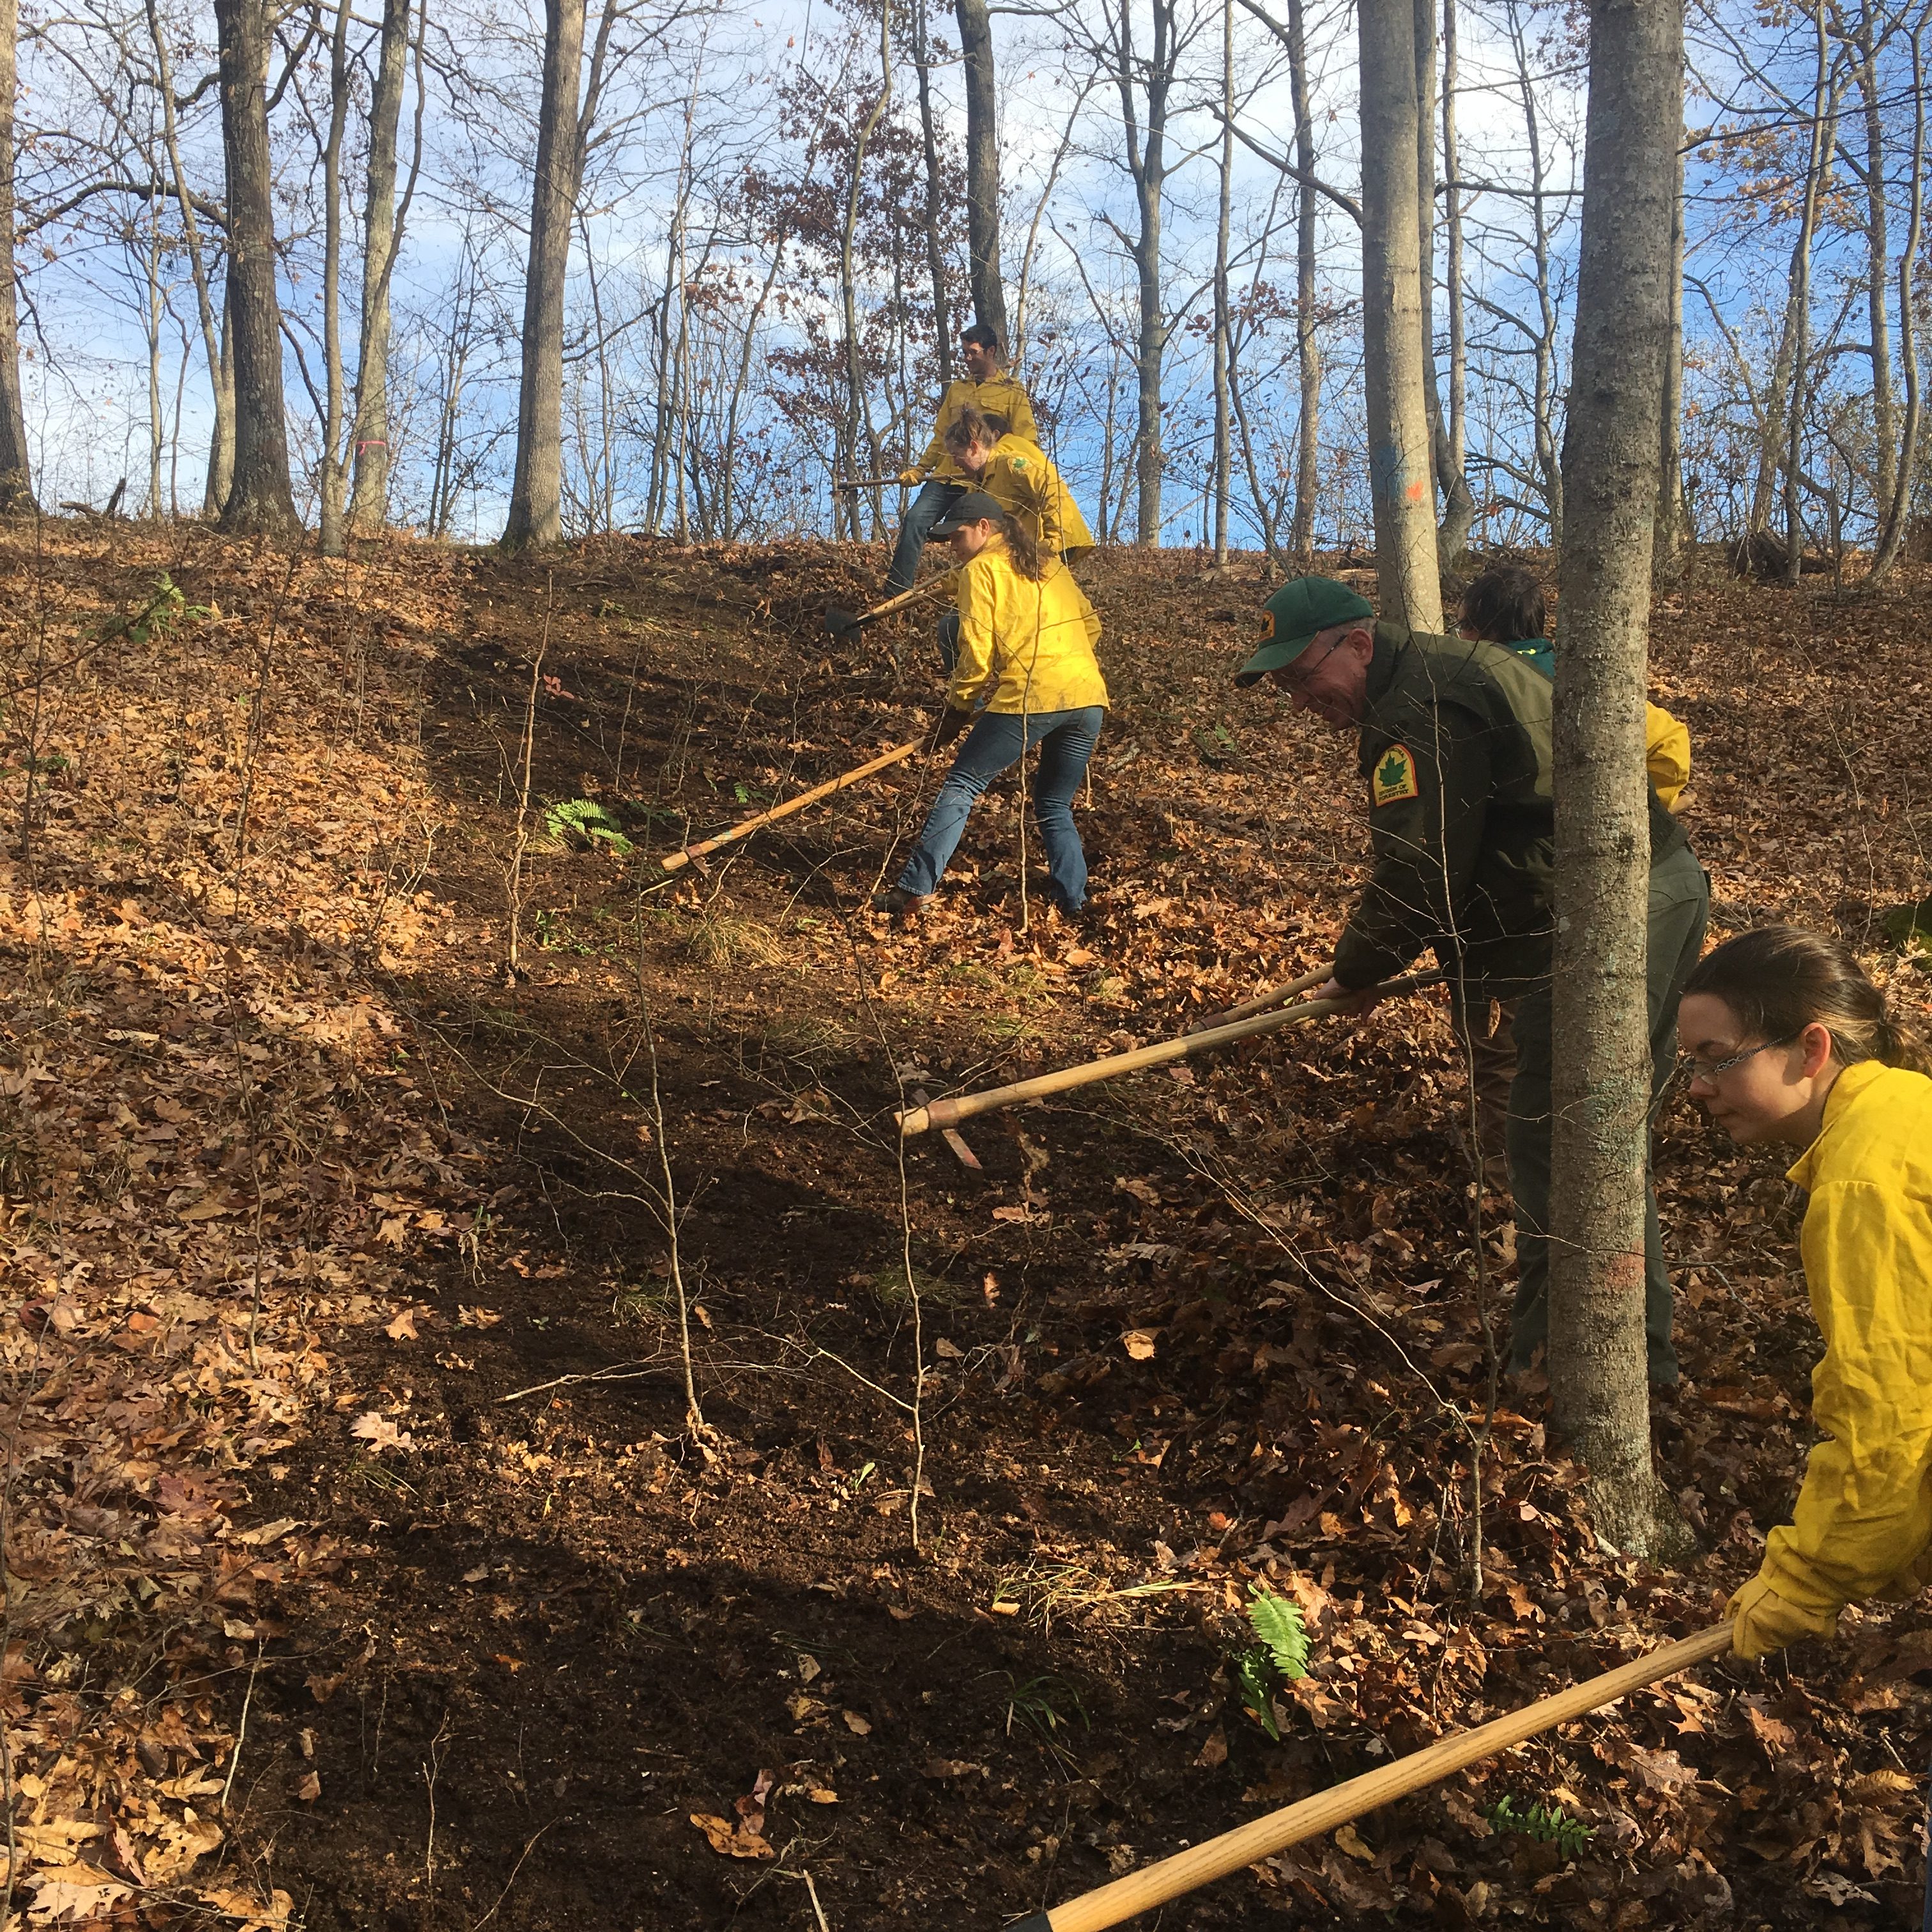 students are constructing fire lines for suppression of wildfire activities as part of the S130/S190 training